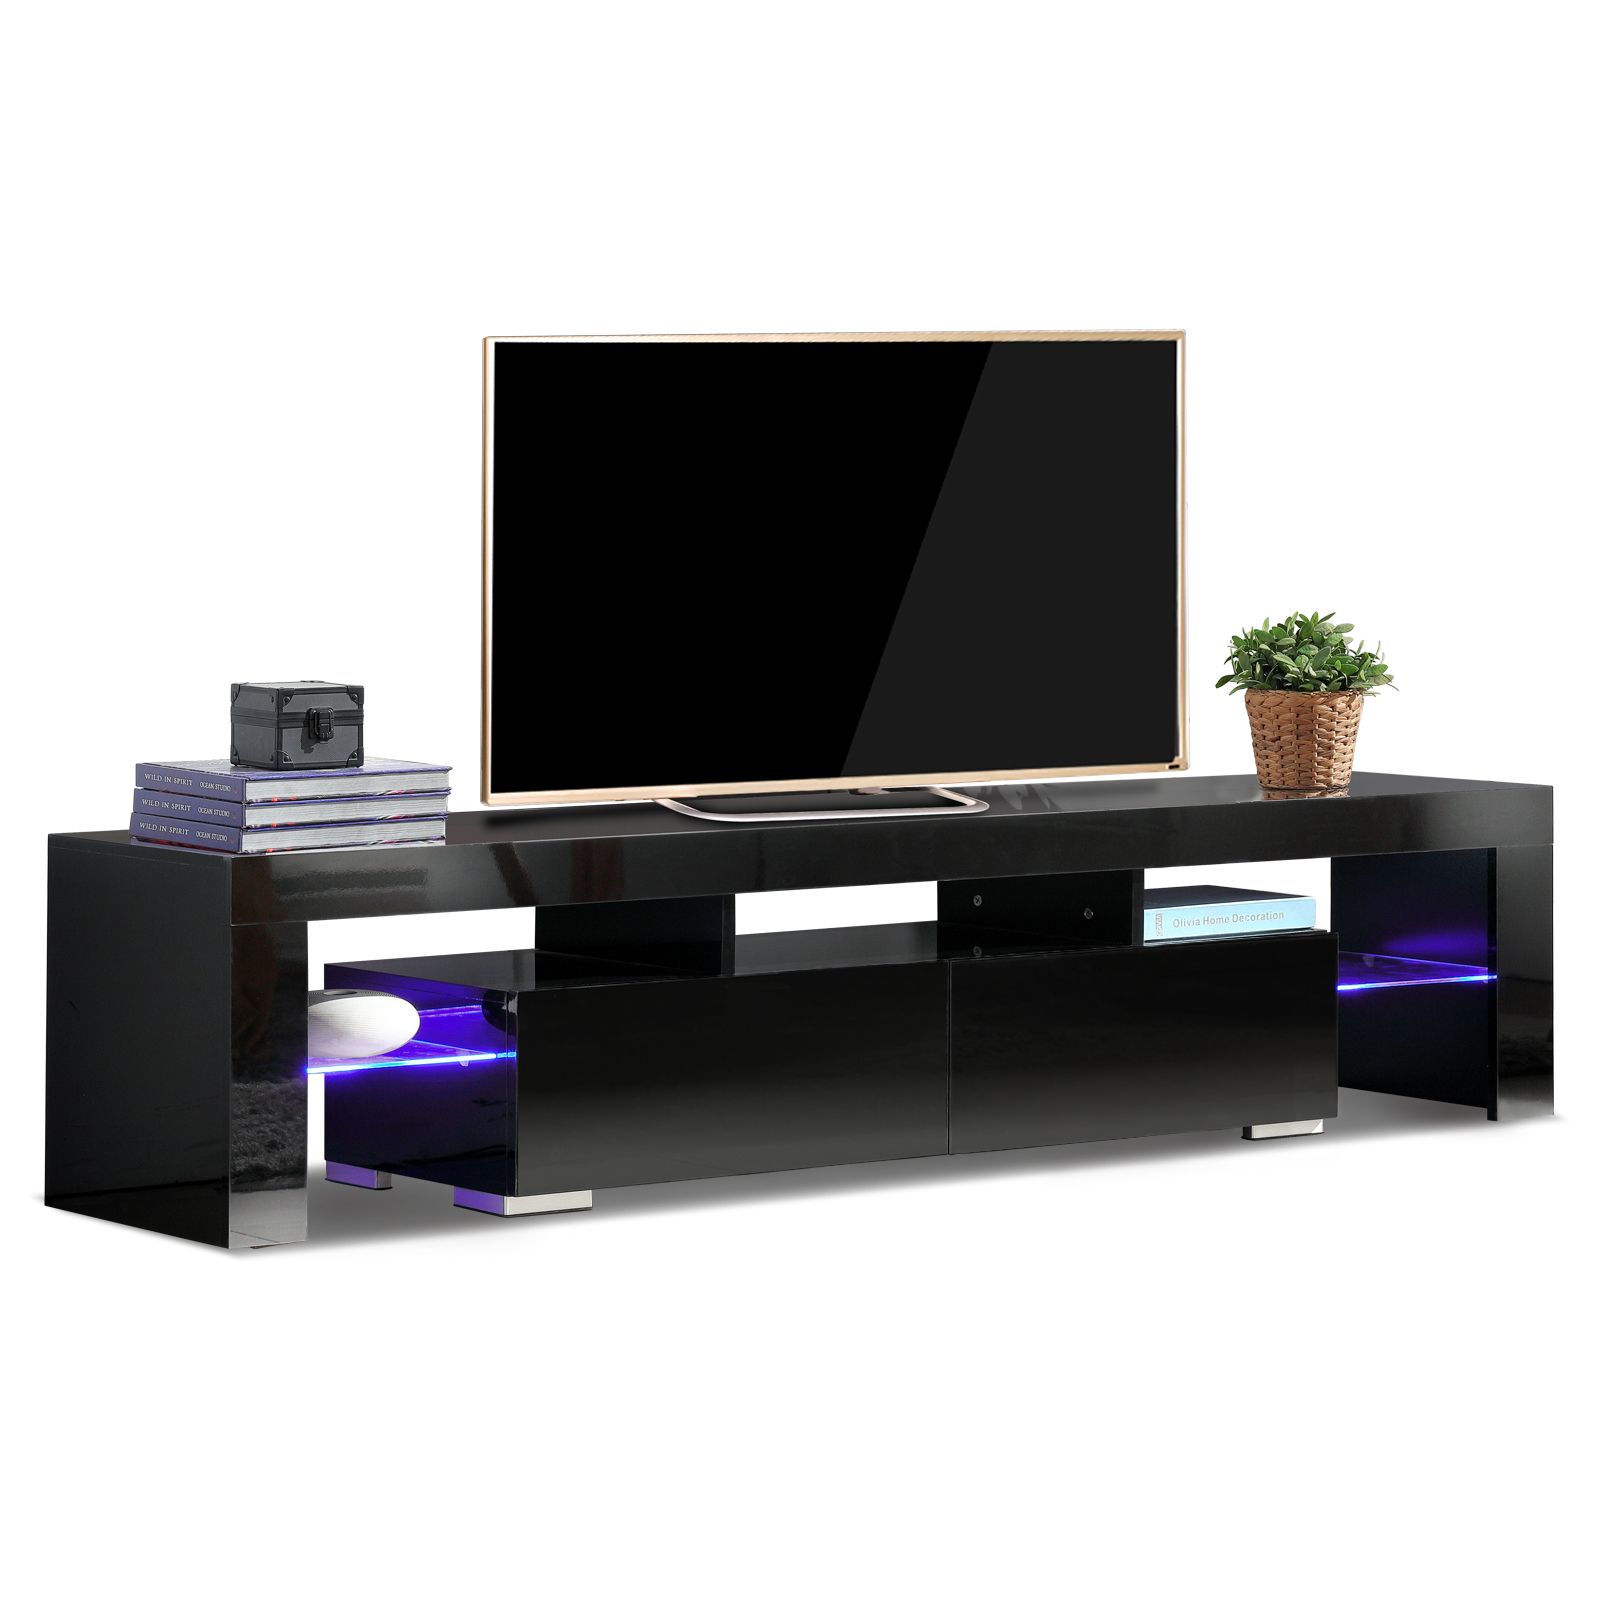 63" High Gloss Black Tv Stands Led Lights Console Cabinet Regarding Black Tv Stands With Drawers (View 6 of 15)